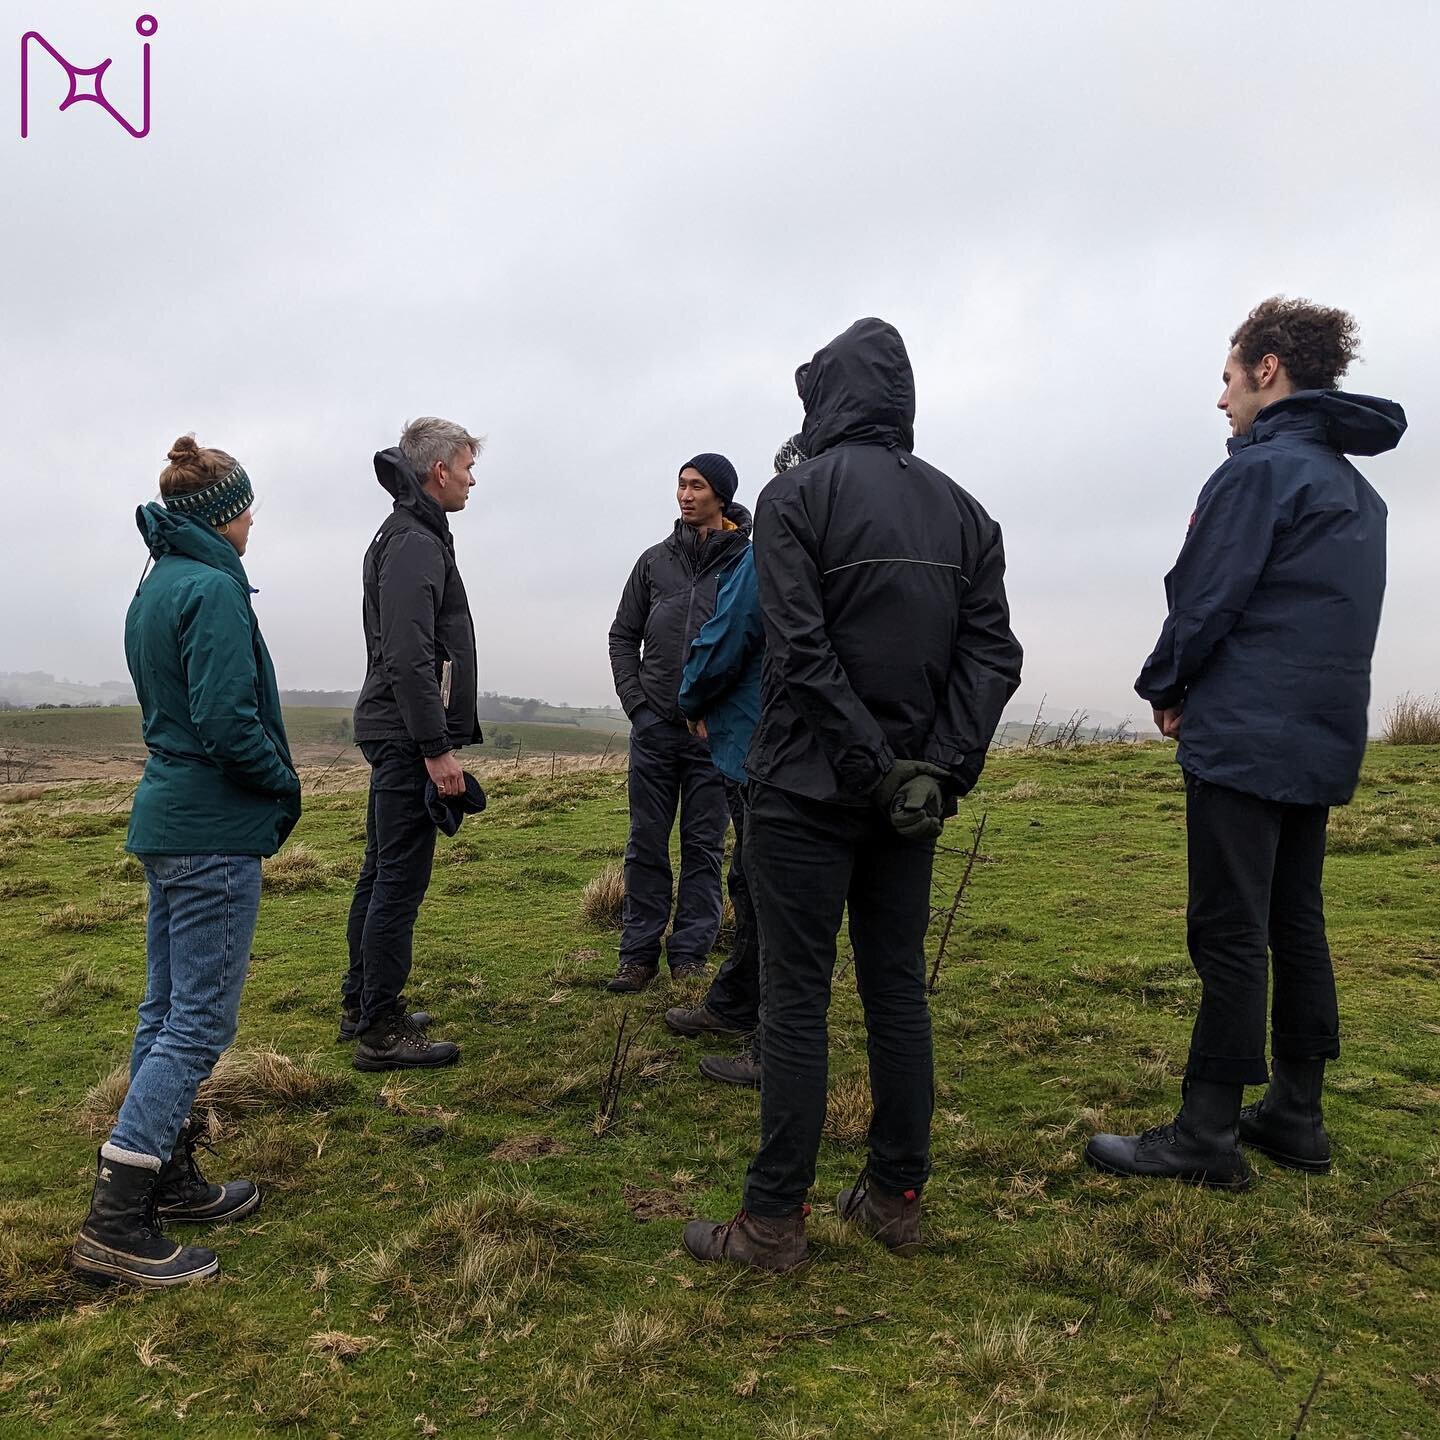 A walk through the catchment of the River Wye with Simon from the Wye and Usk Foundation. Discussing the problems the catchment faces and potential solutions that could be involved in Wye-Usk Transition Lab.

#wyeusktransitionlab #northstartransition